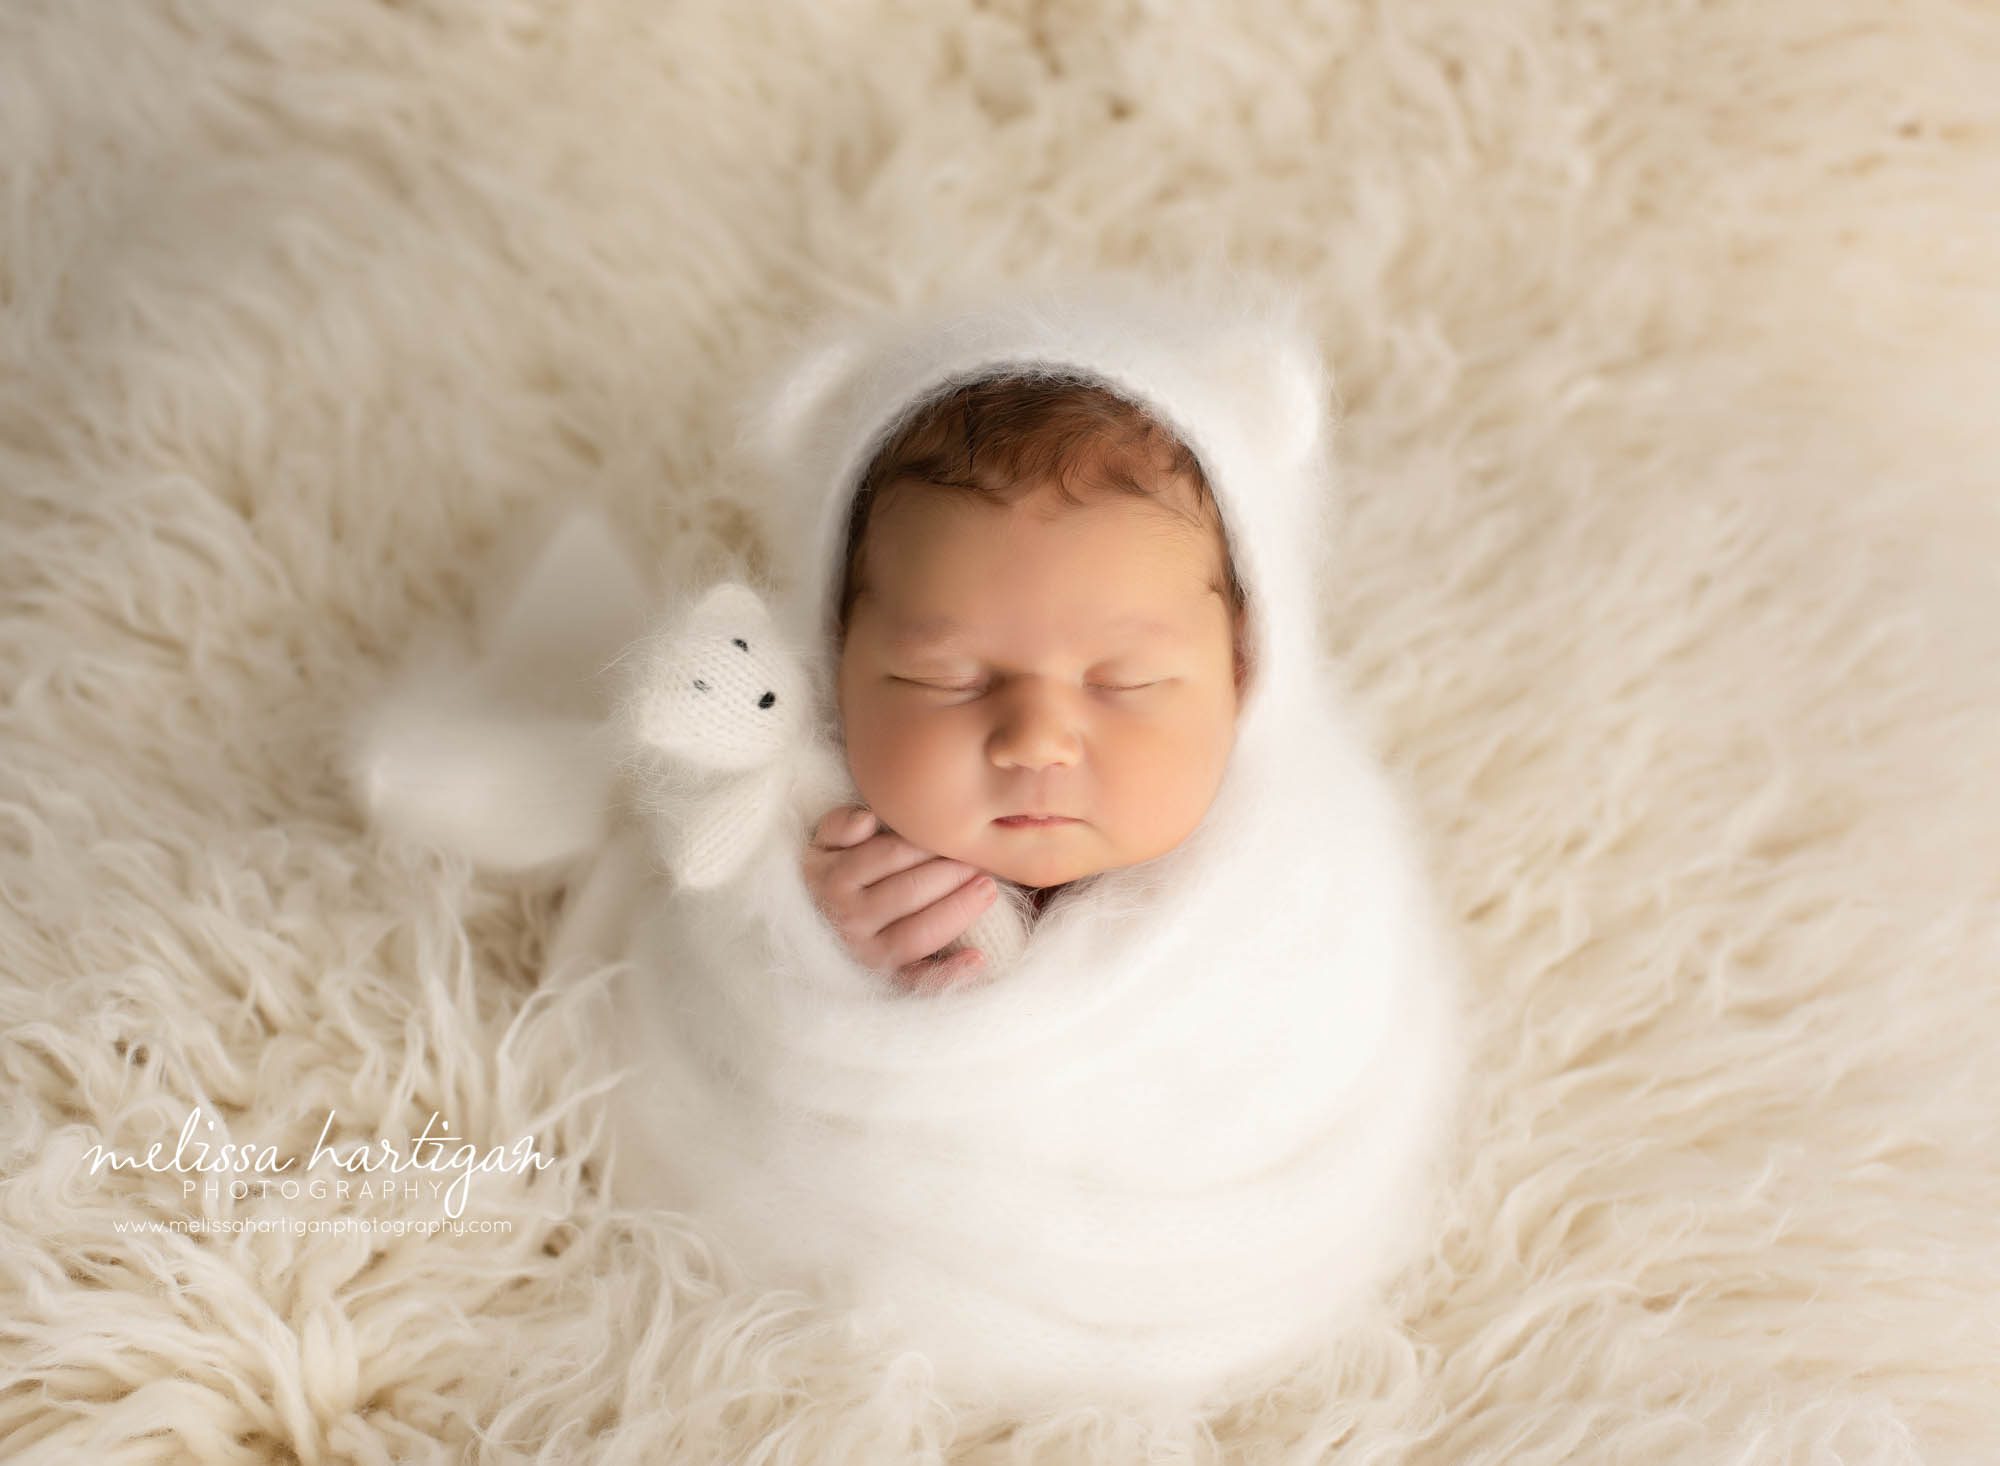 newborn baby girl wrapped in knitted white wraped with matching bear bonnet and teddy bear